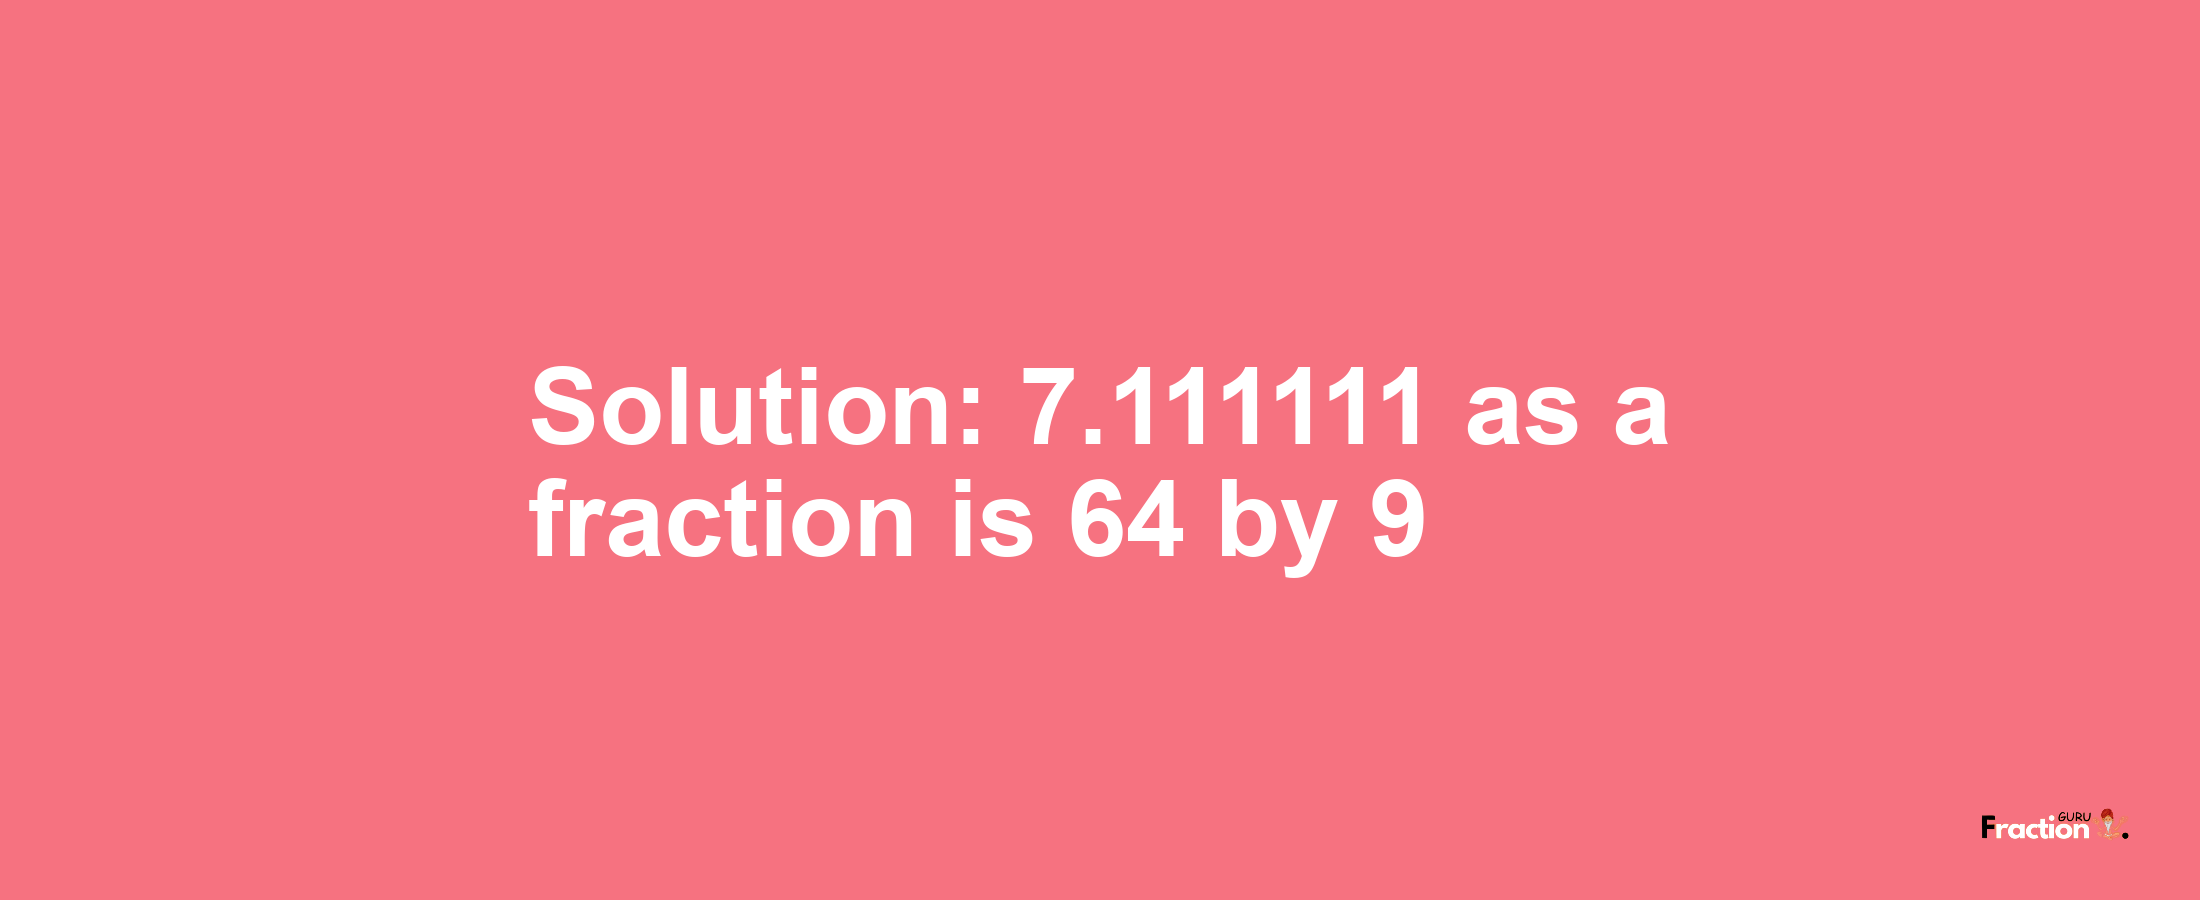 Solution:7.111111 as a fraction is 64/9